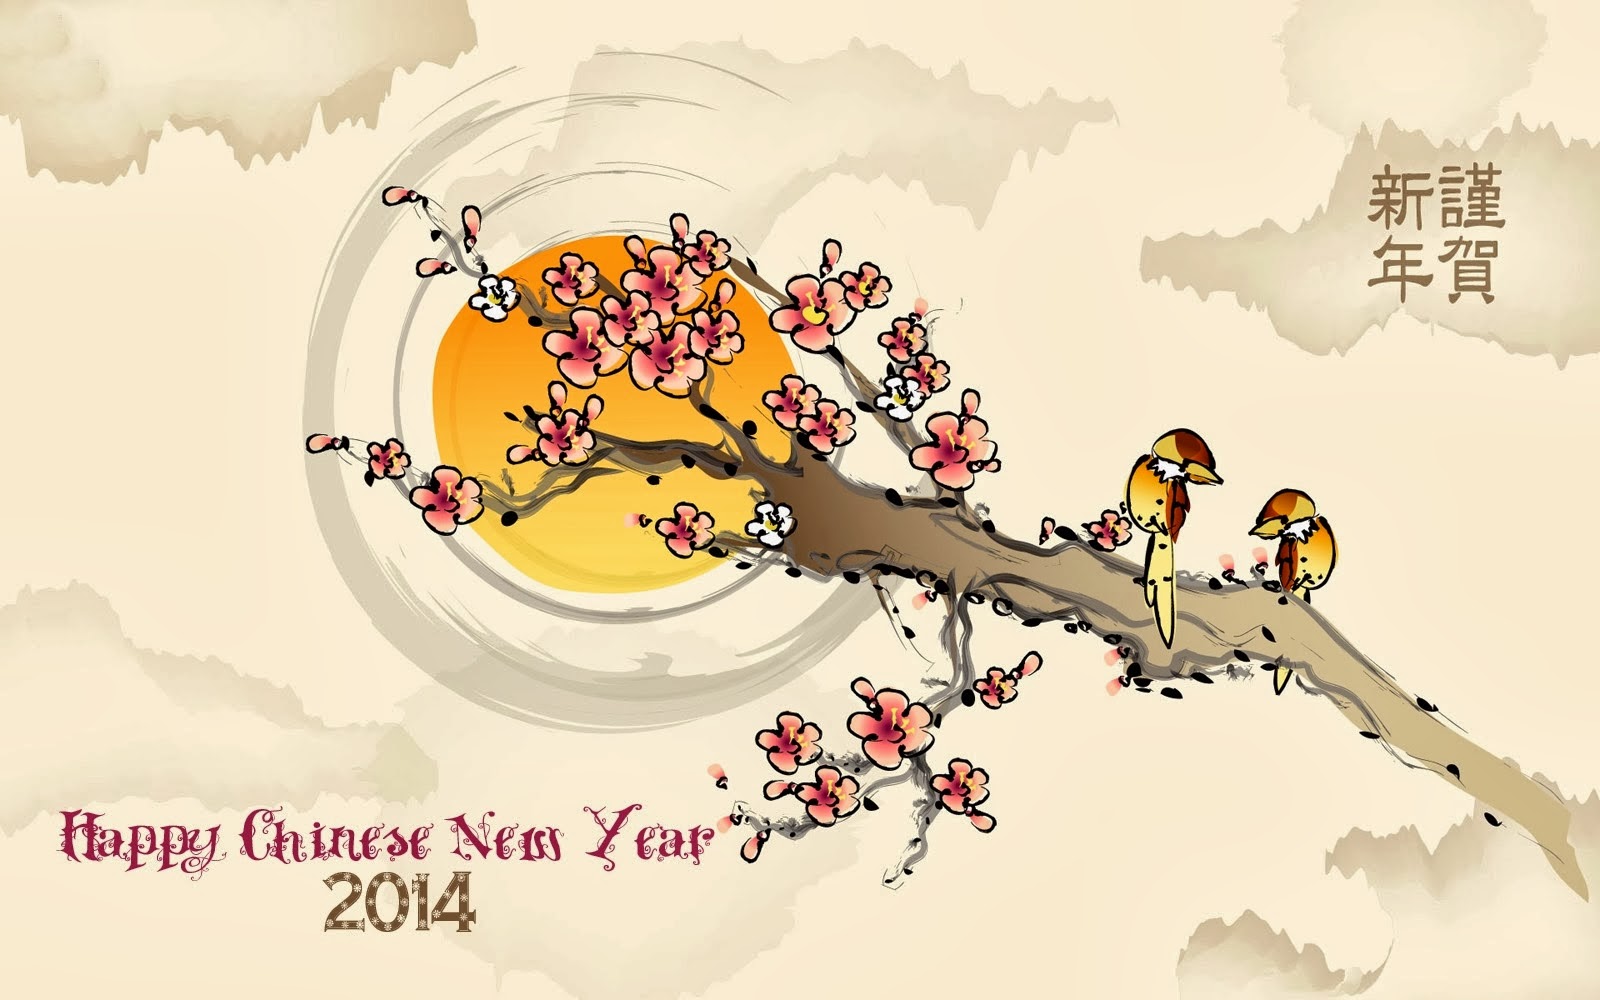 Happy Chinese New Year Happy Lunar New Year 2014 Tet New Year 2014 ...